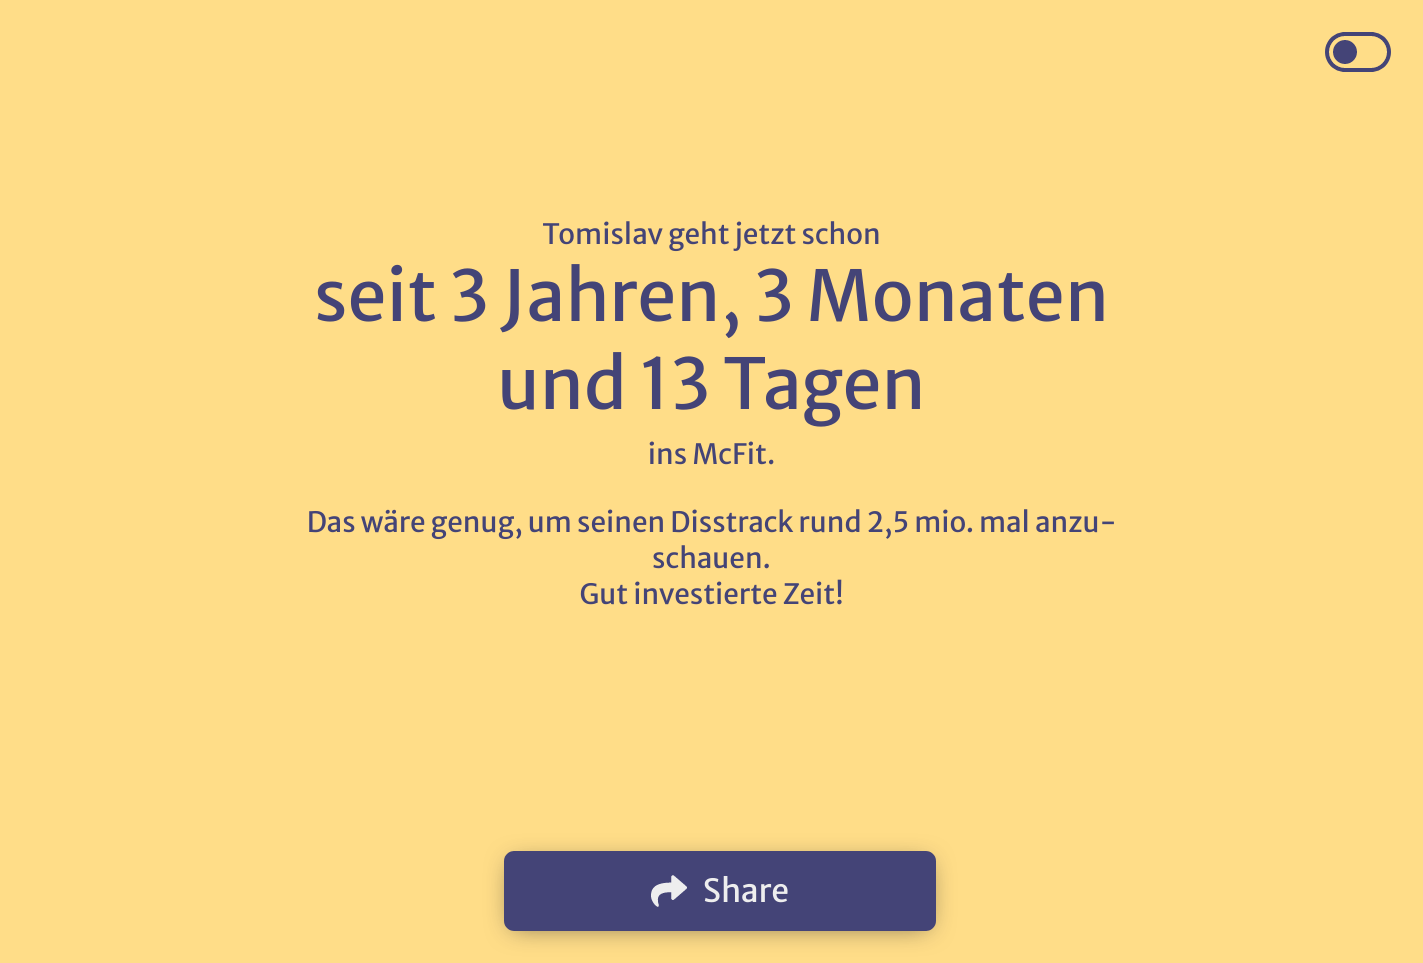 A screenshot of https://tomi.cza.li. This website counts the time since some event in German.